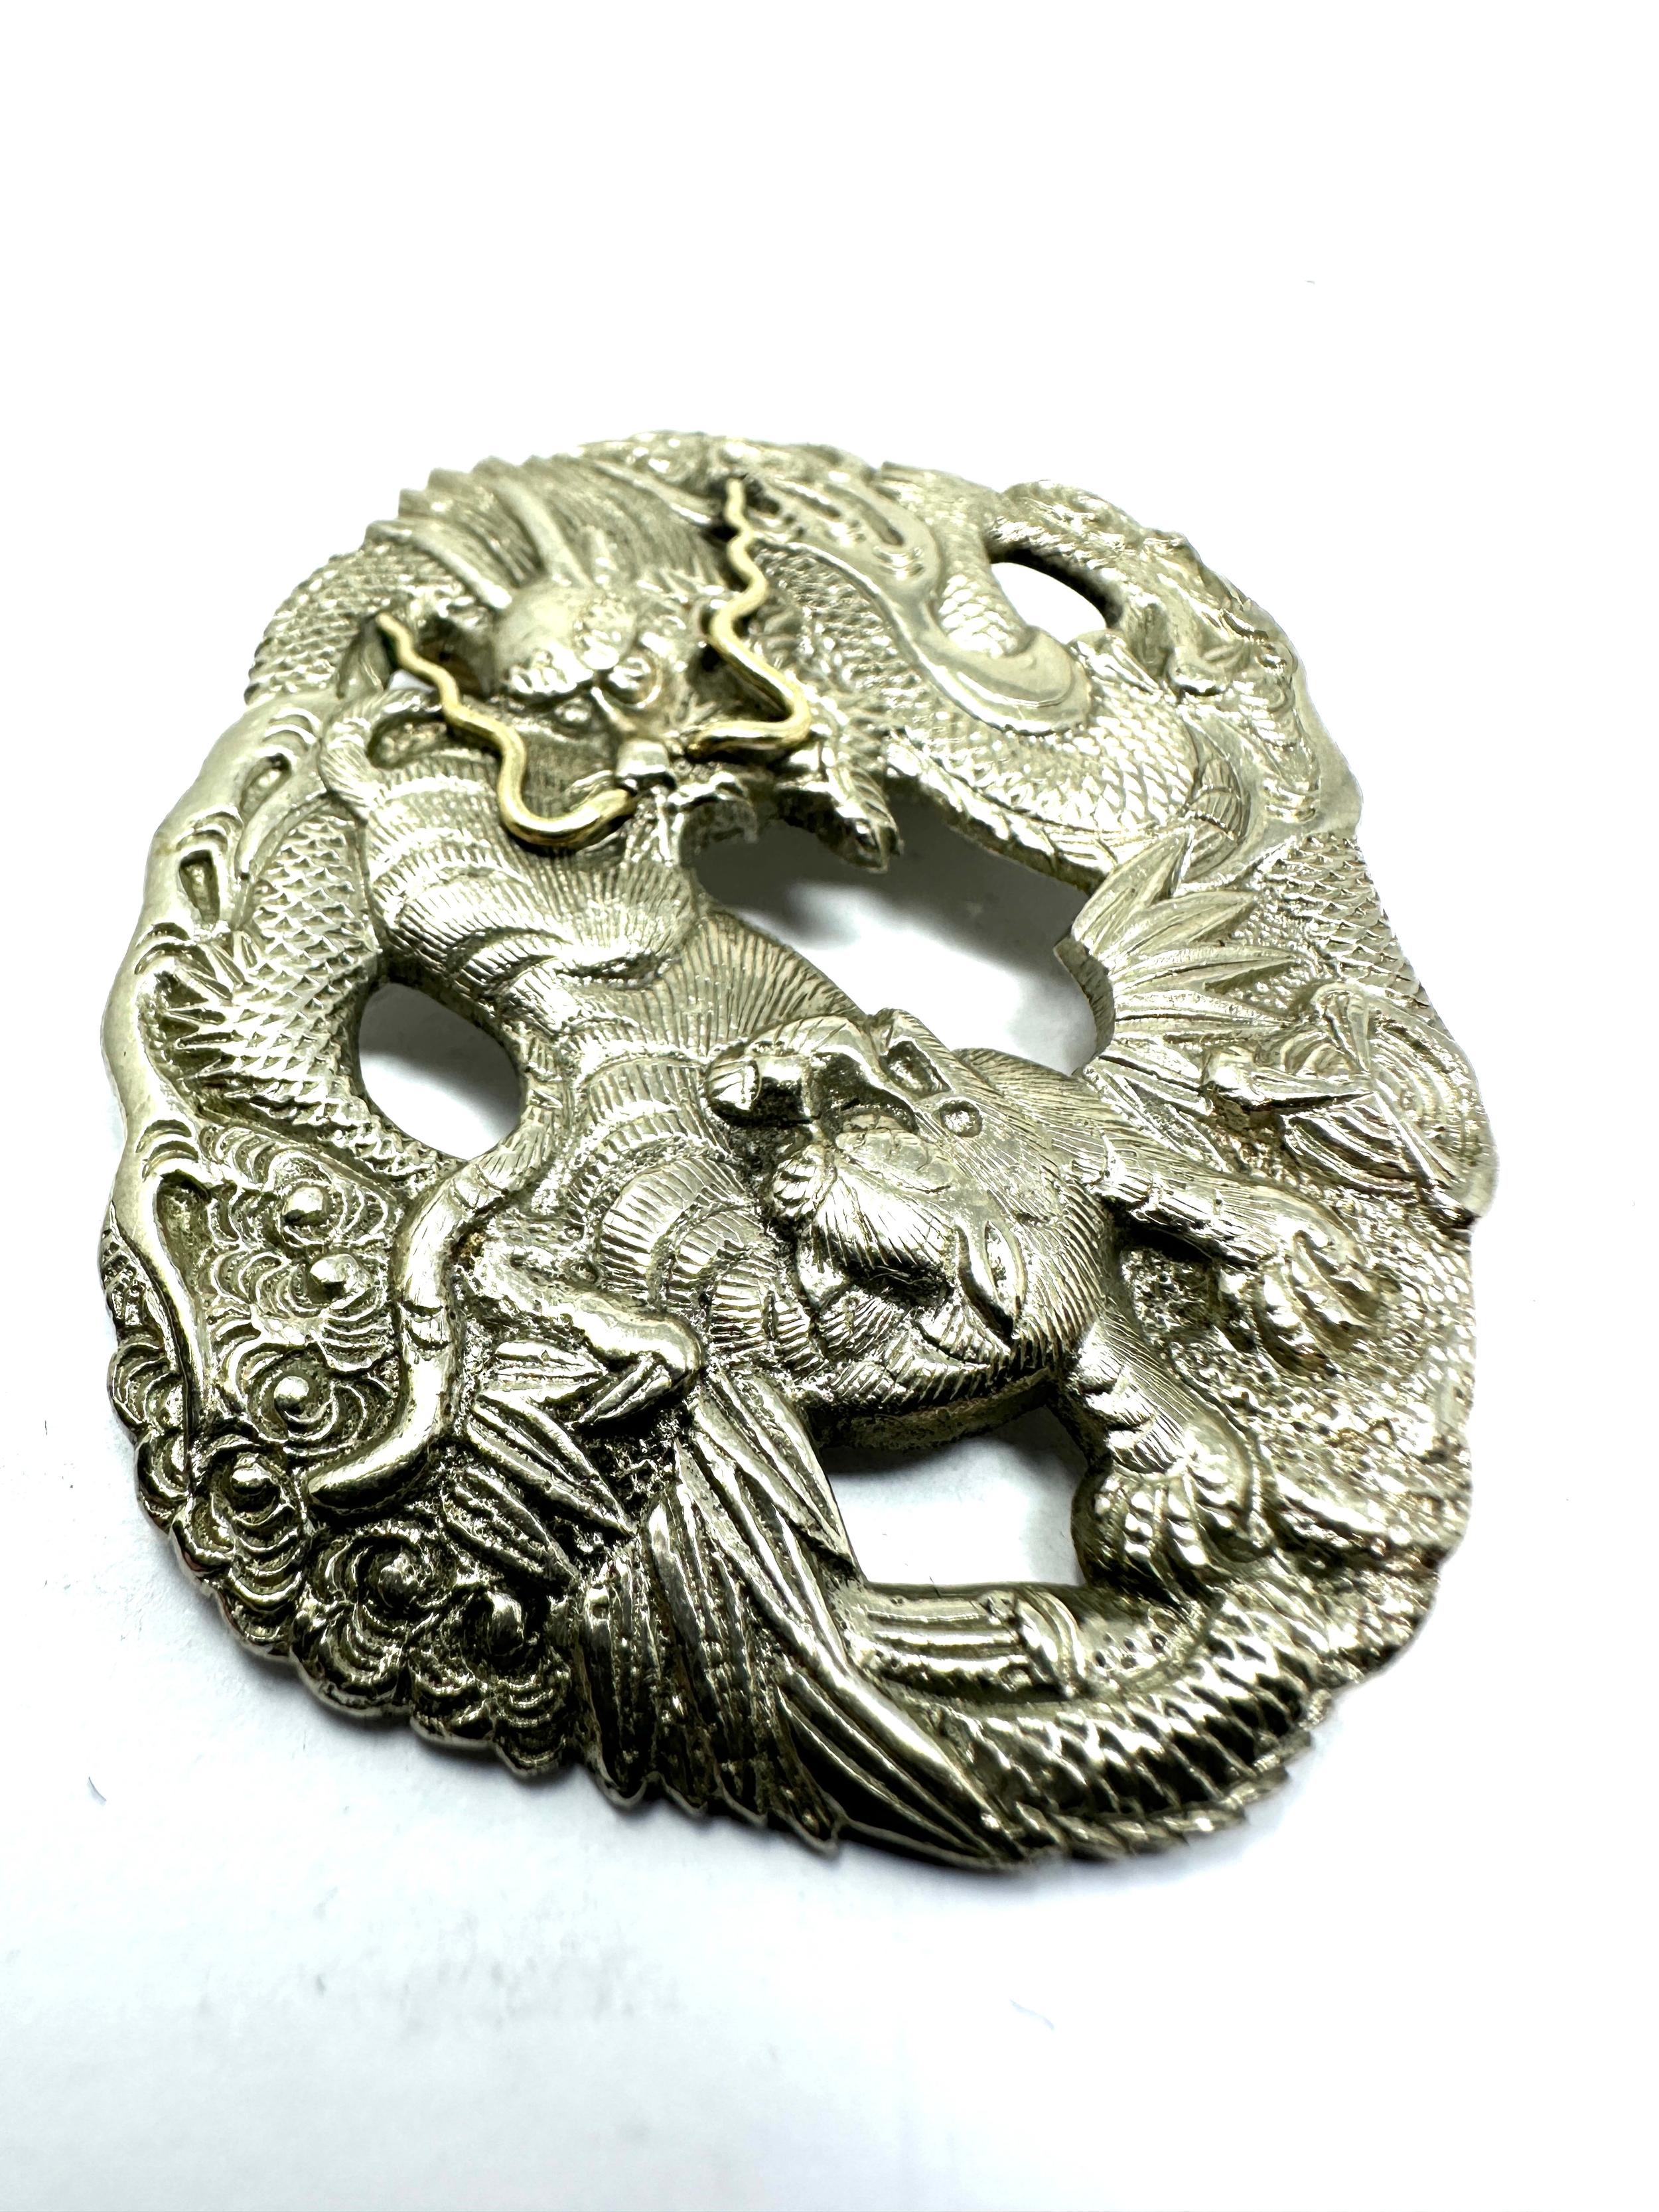 vintage silver chinese dragon buckle measures approx 6cm by 5cm - Image 3 of 5